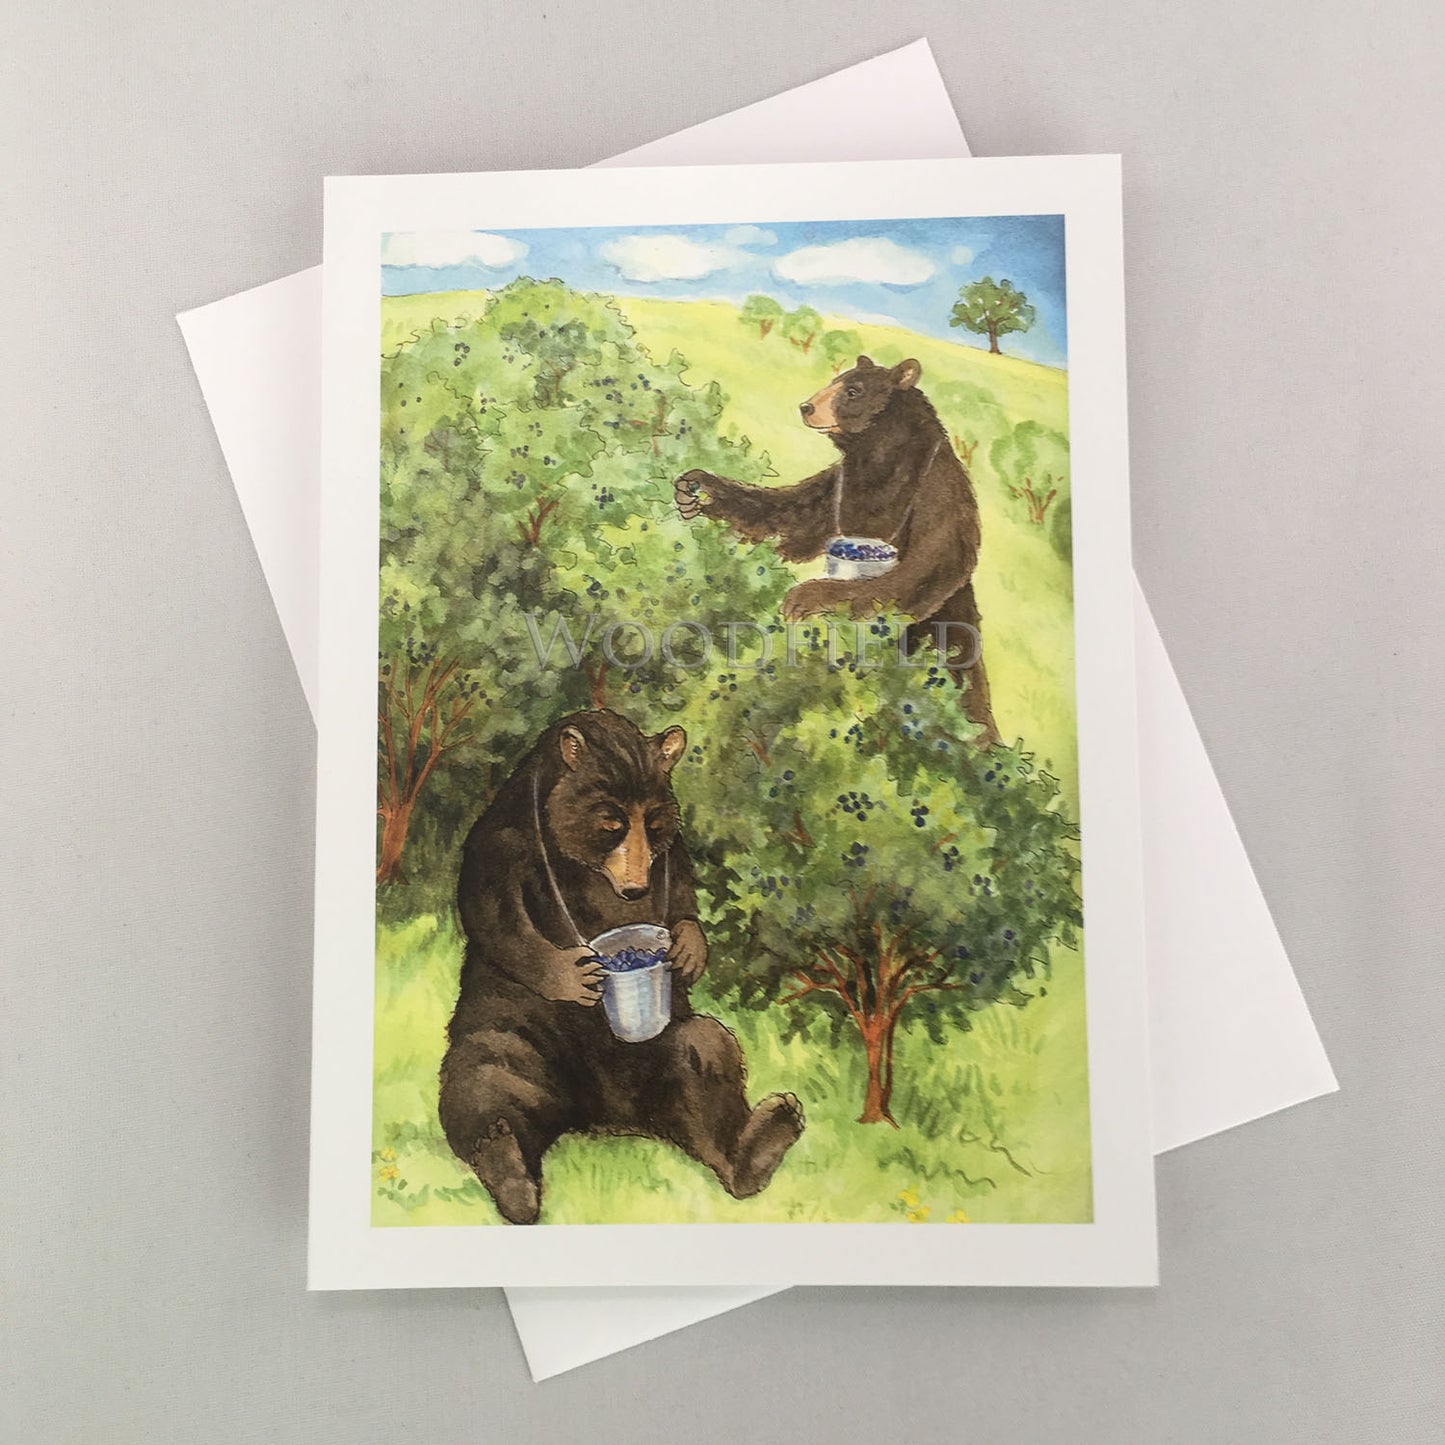 Picking Berries - Greeting Card by Woodfield Press